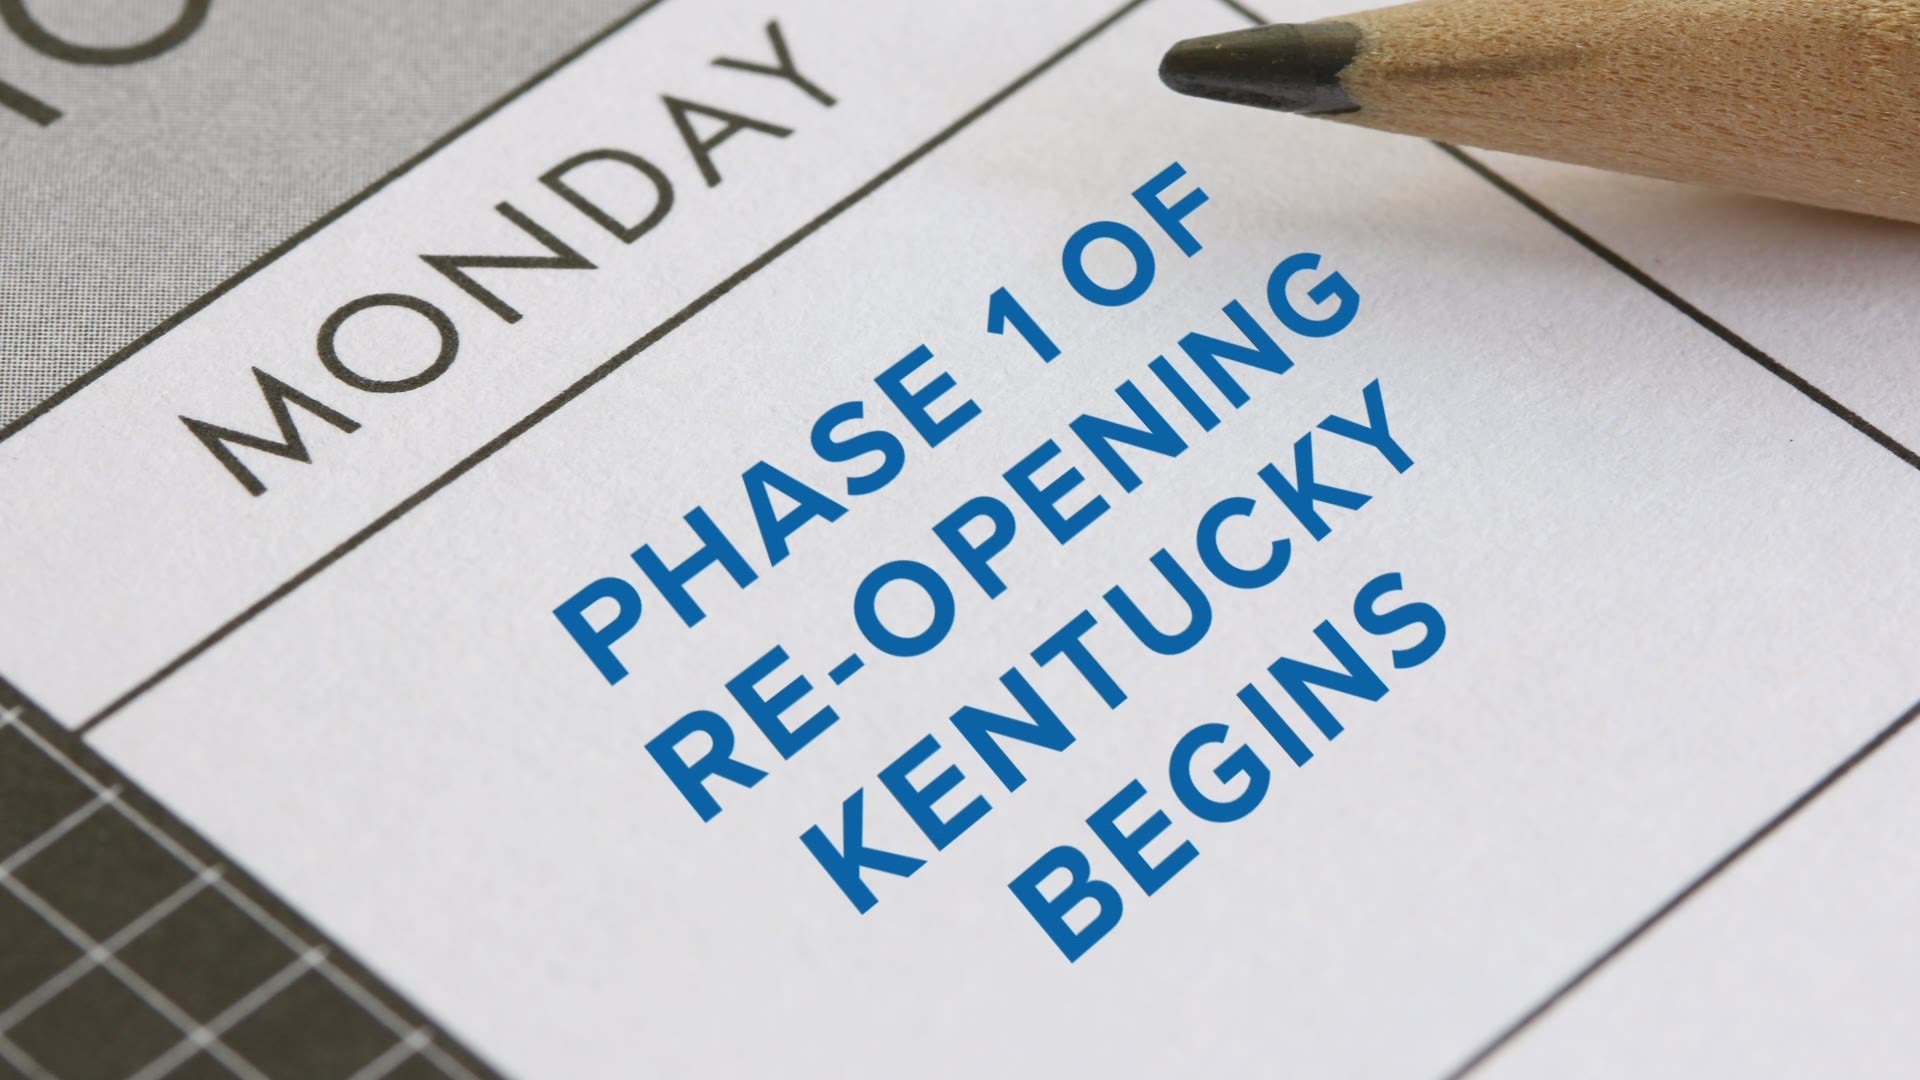 Phase 1 of Kentucky's Healthy at Work initiative involves opening up healthcare services.